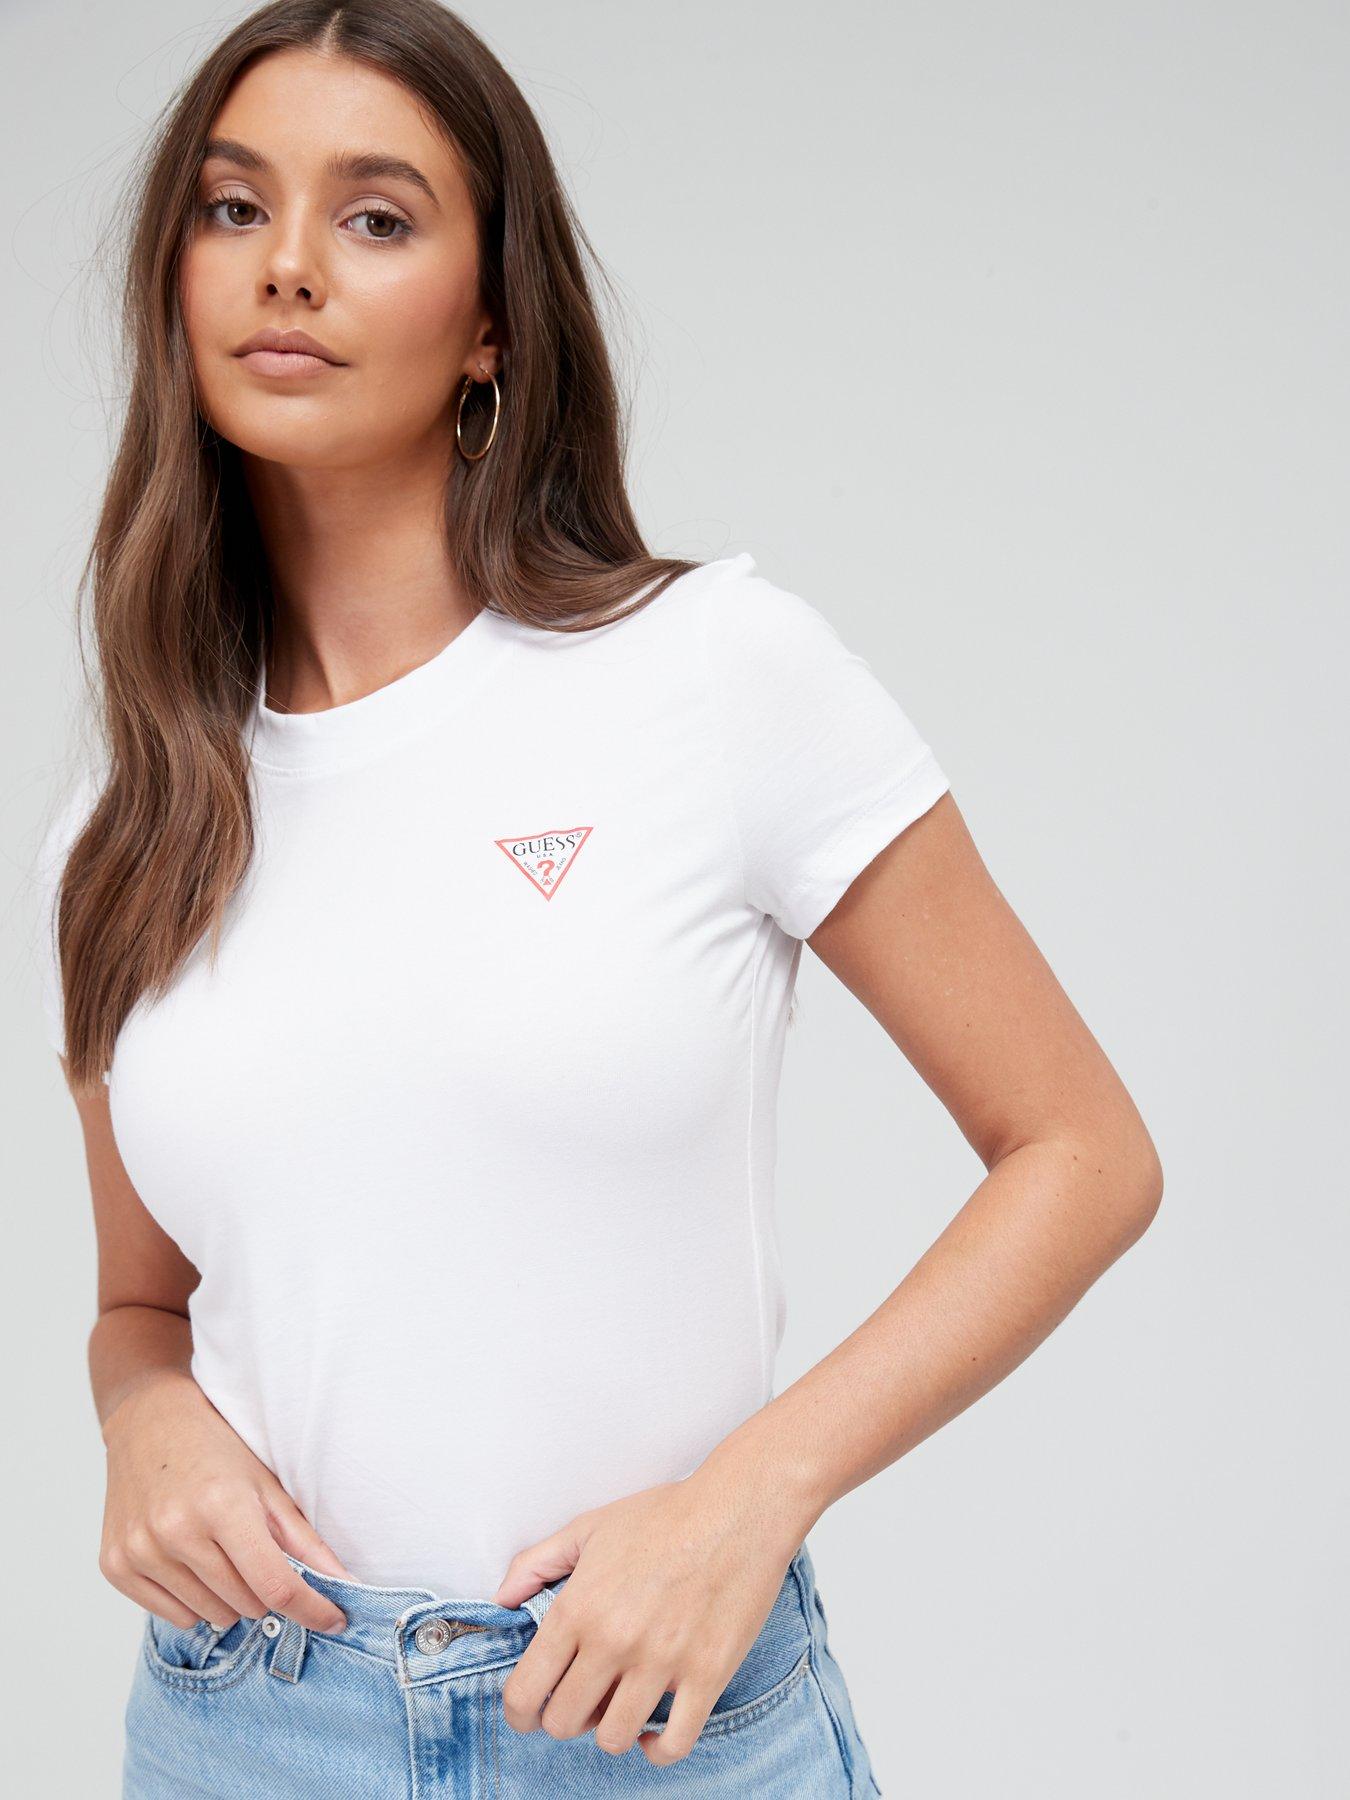 UK Guess Clothing, Accessories & | Very.co.uk